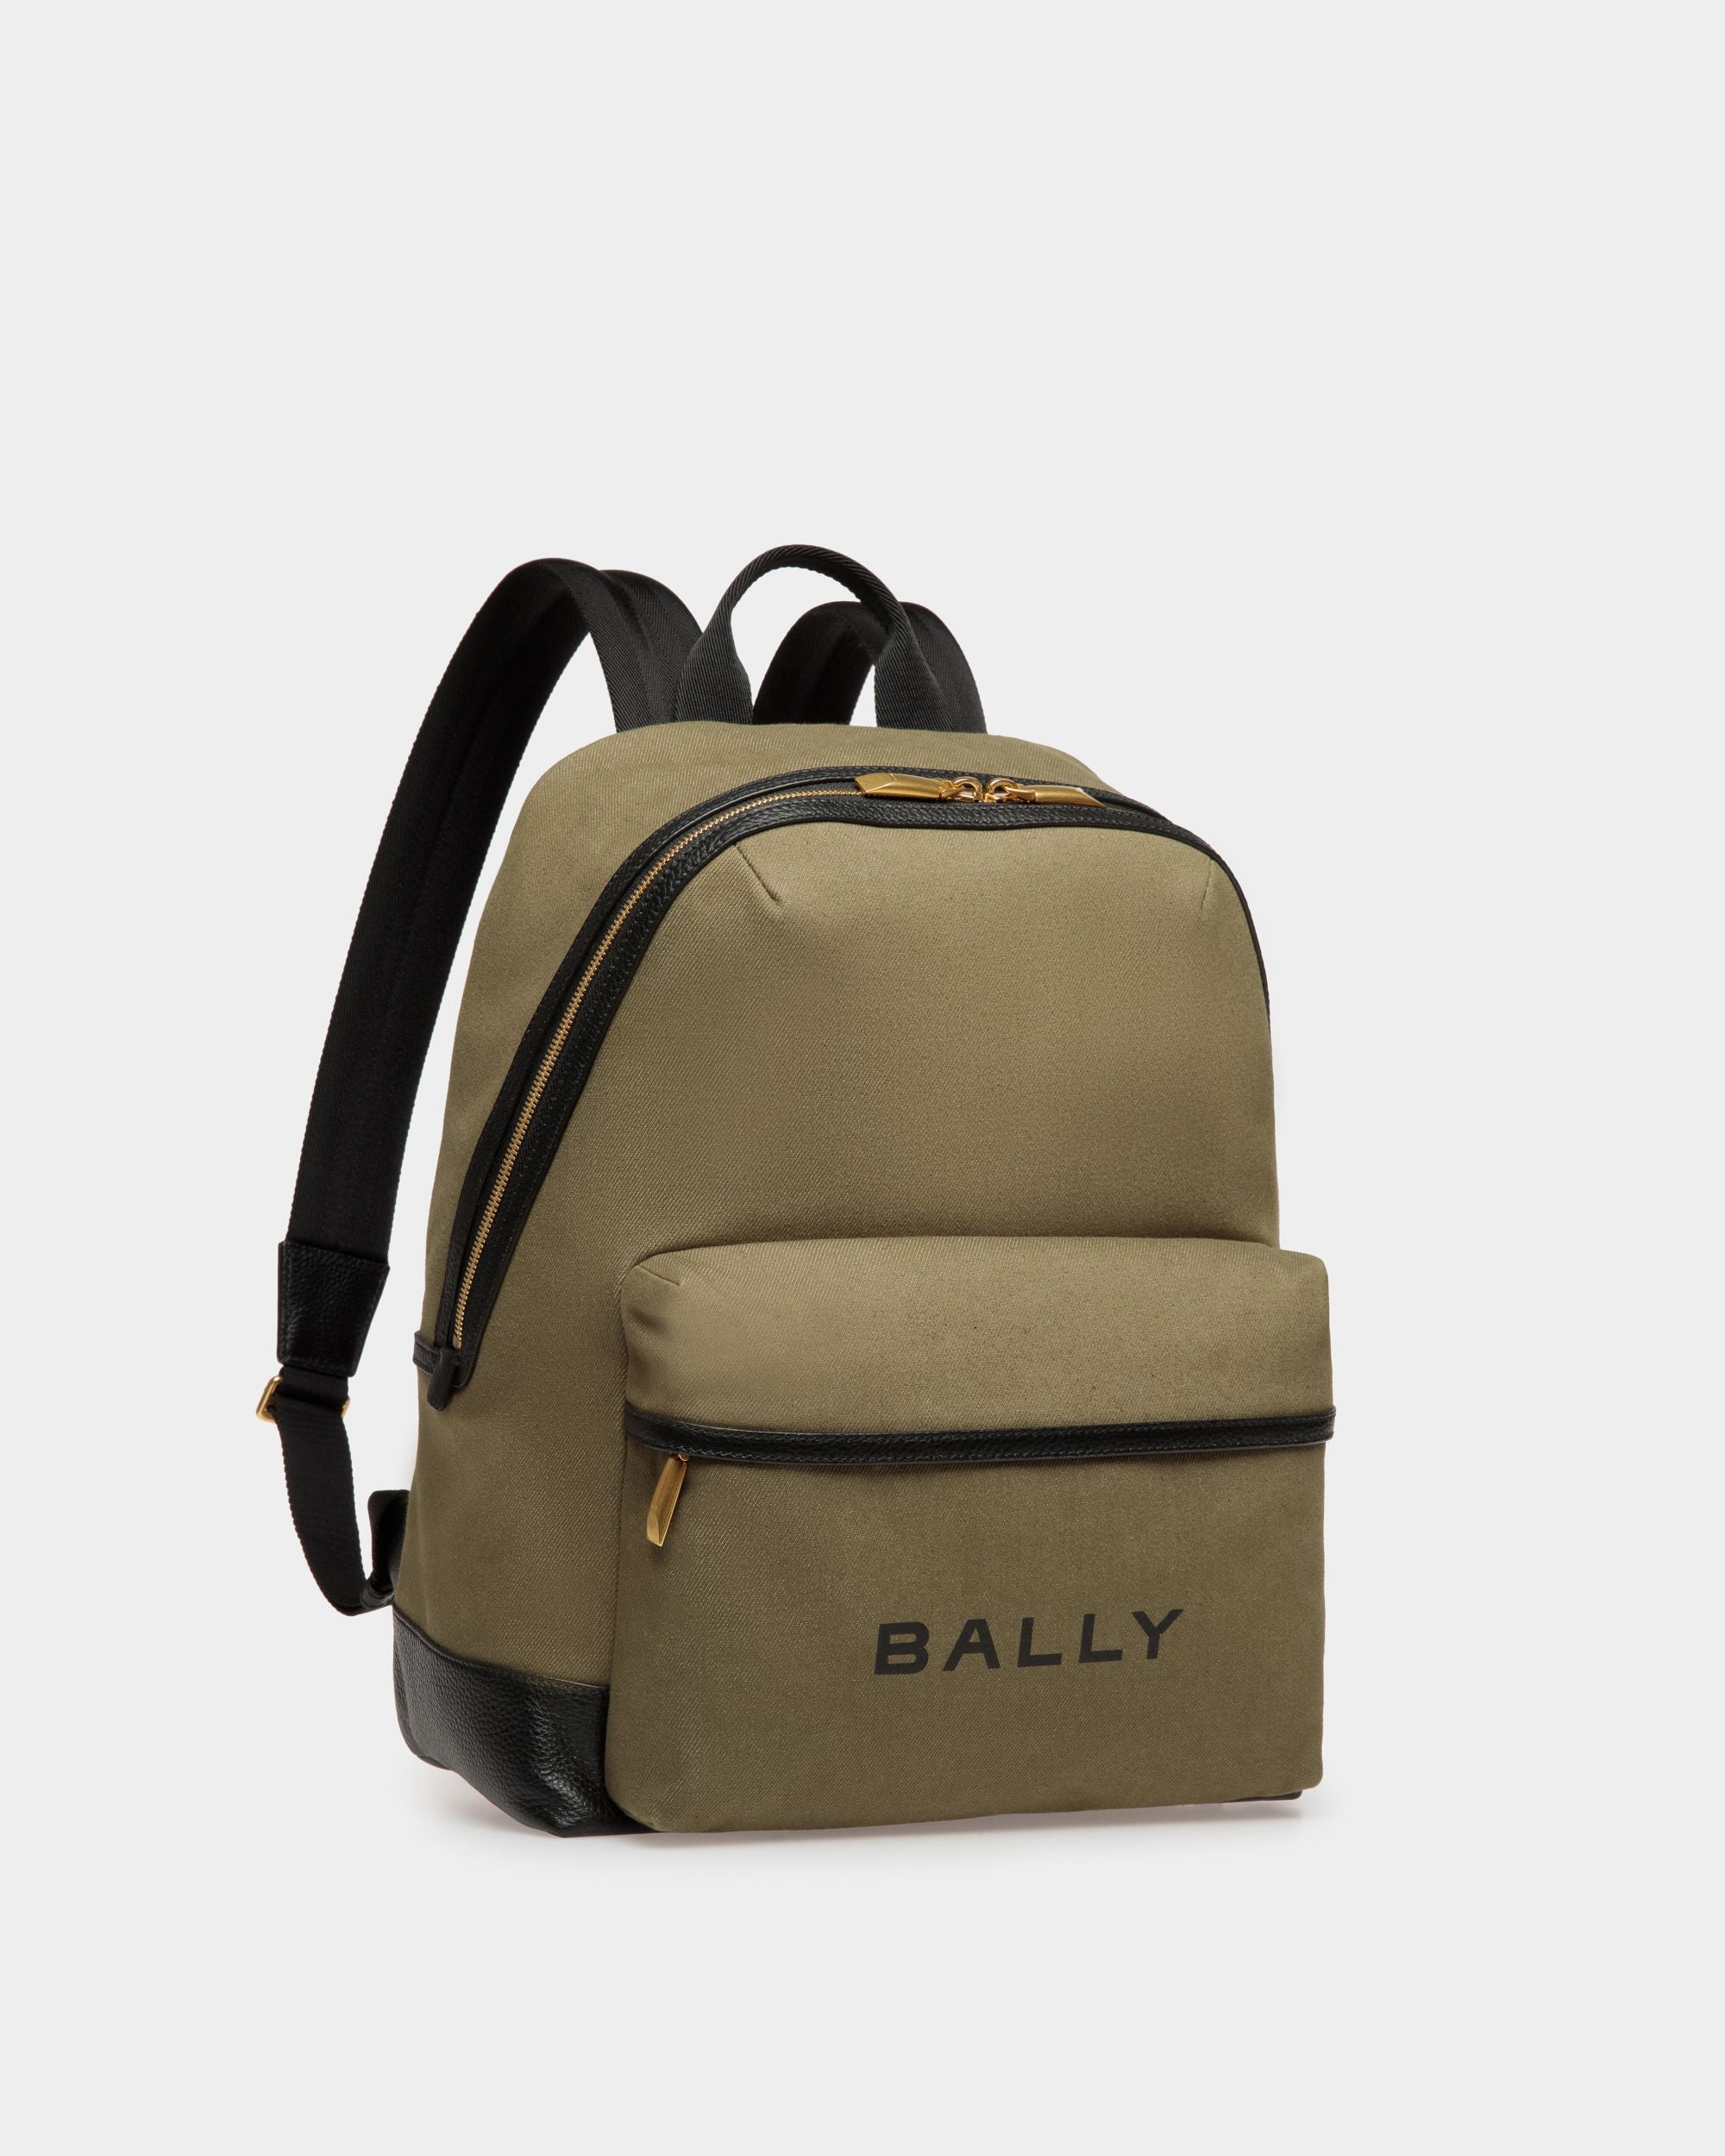 Bar | Men's Backpack in Green Canvas And Black Leather | Bally | Still Life 3/4 Front